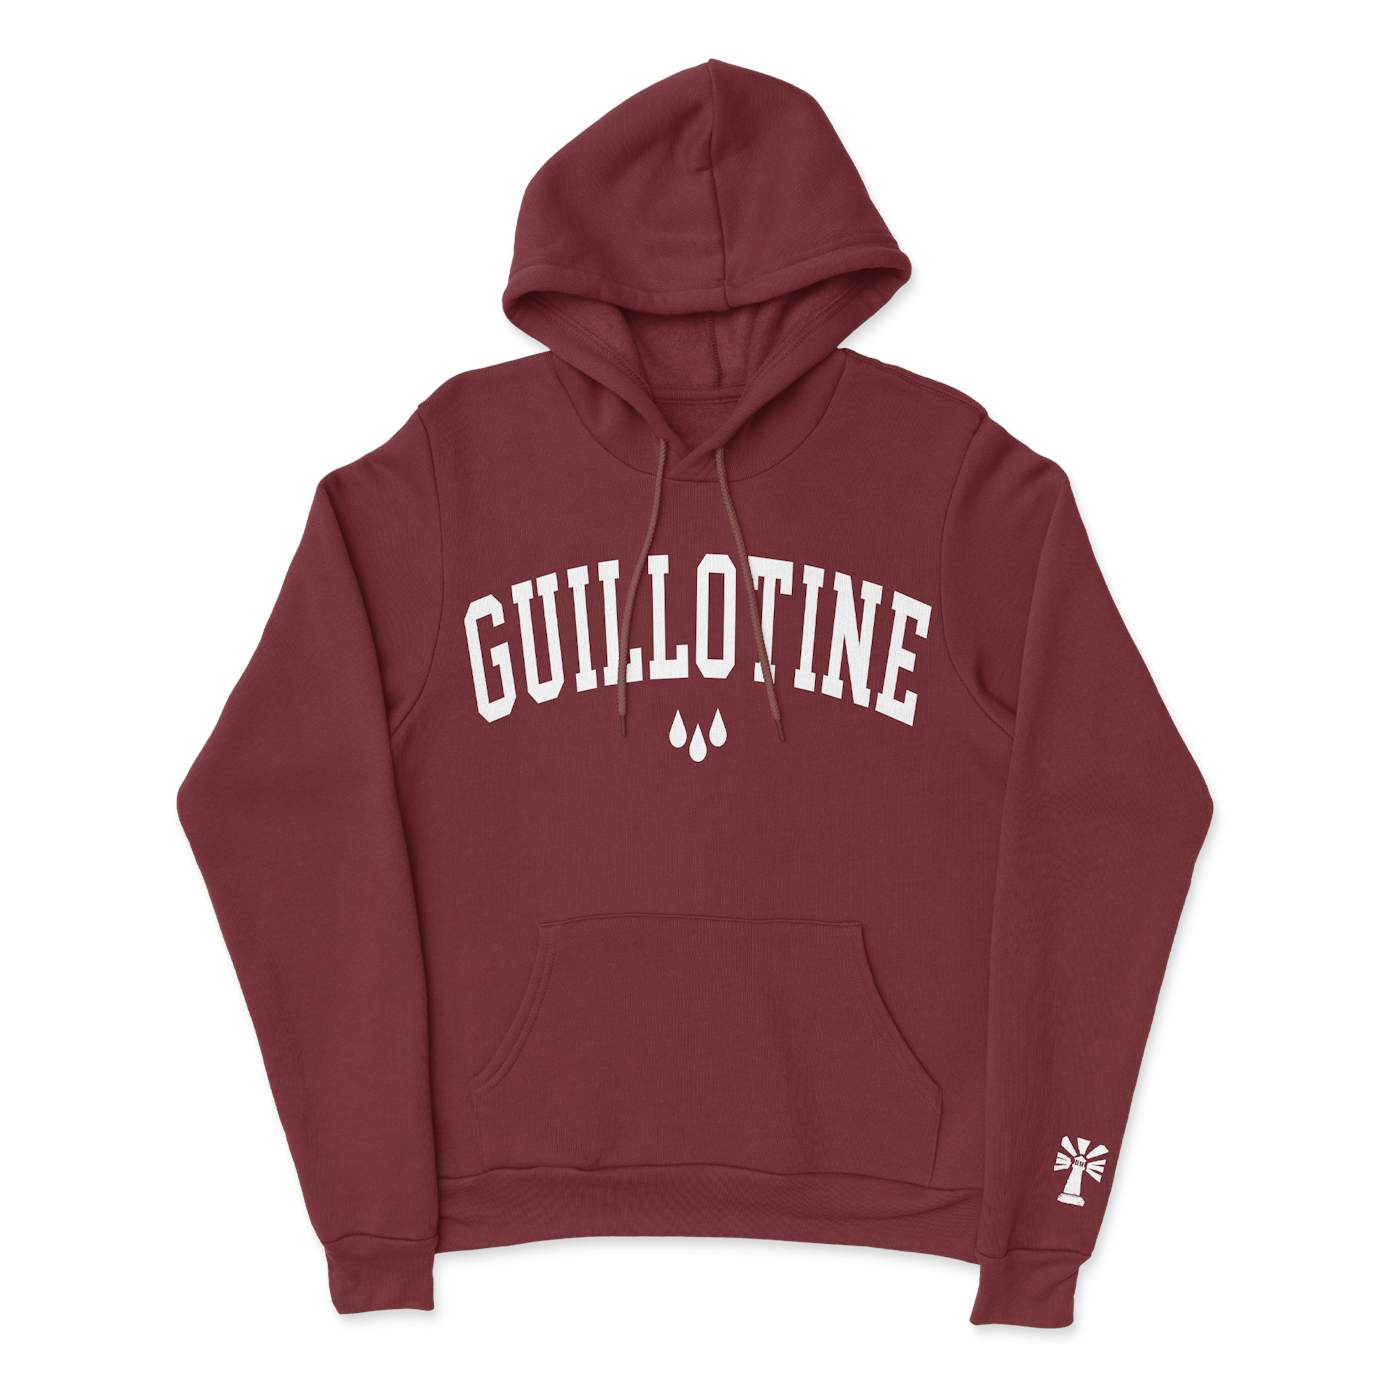 Stray From The Path - Maroon Guillotine Hoodie w/Embroidered Sleeve